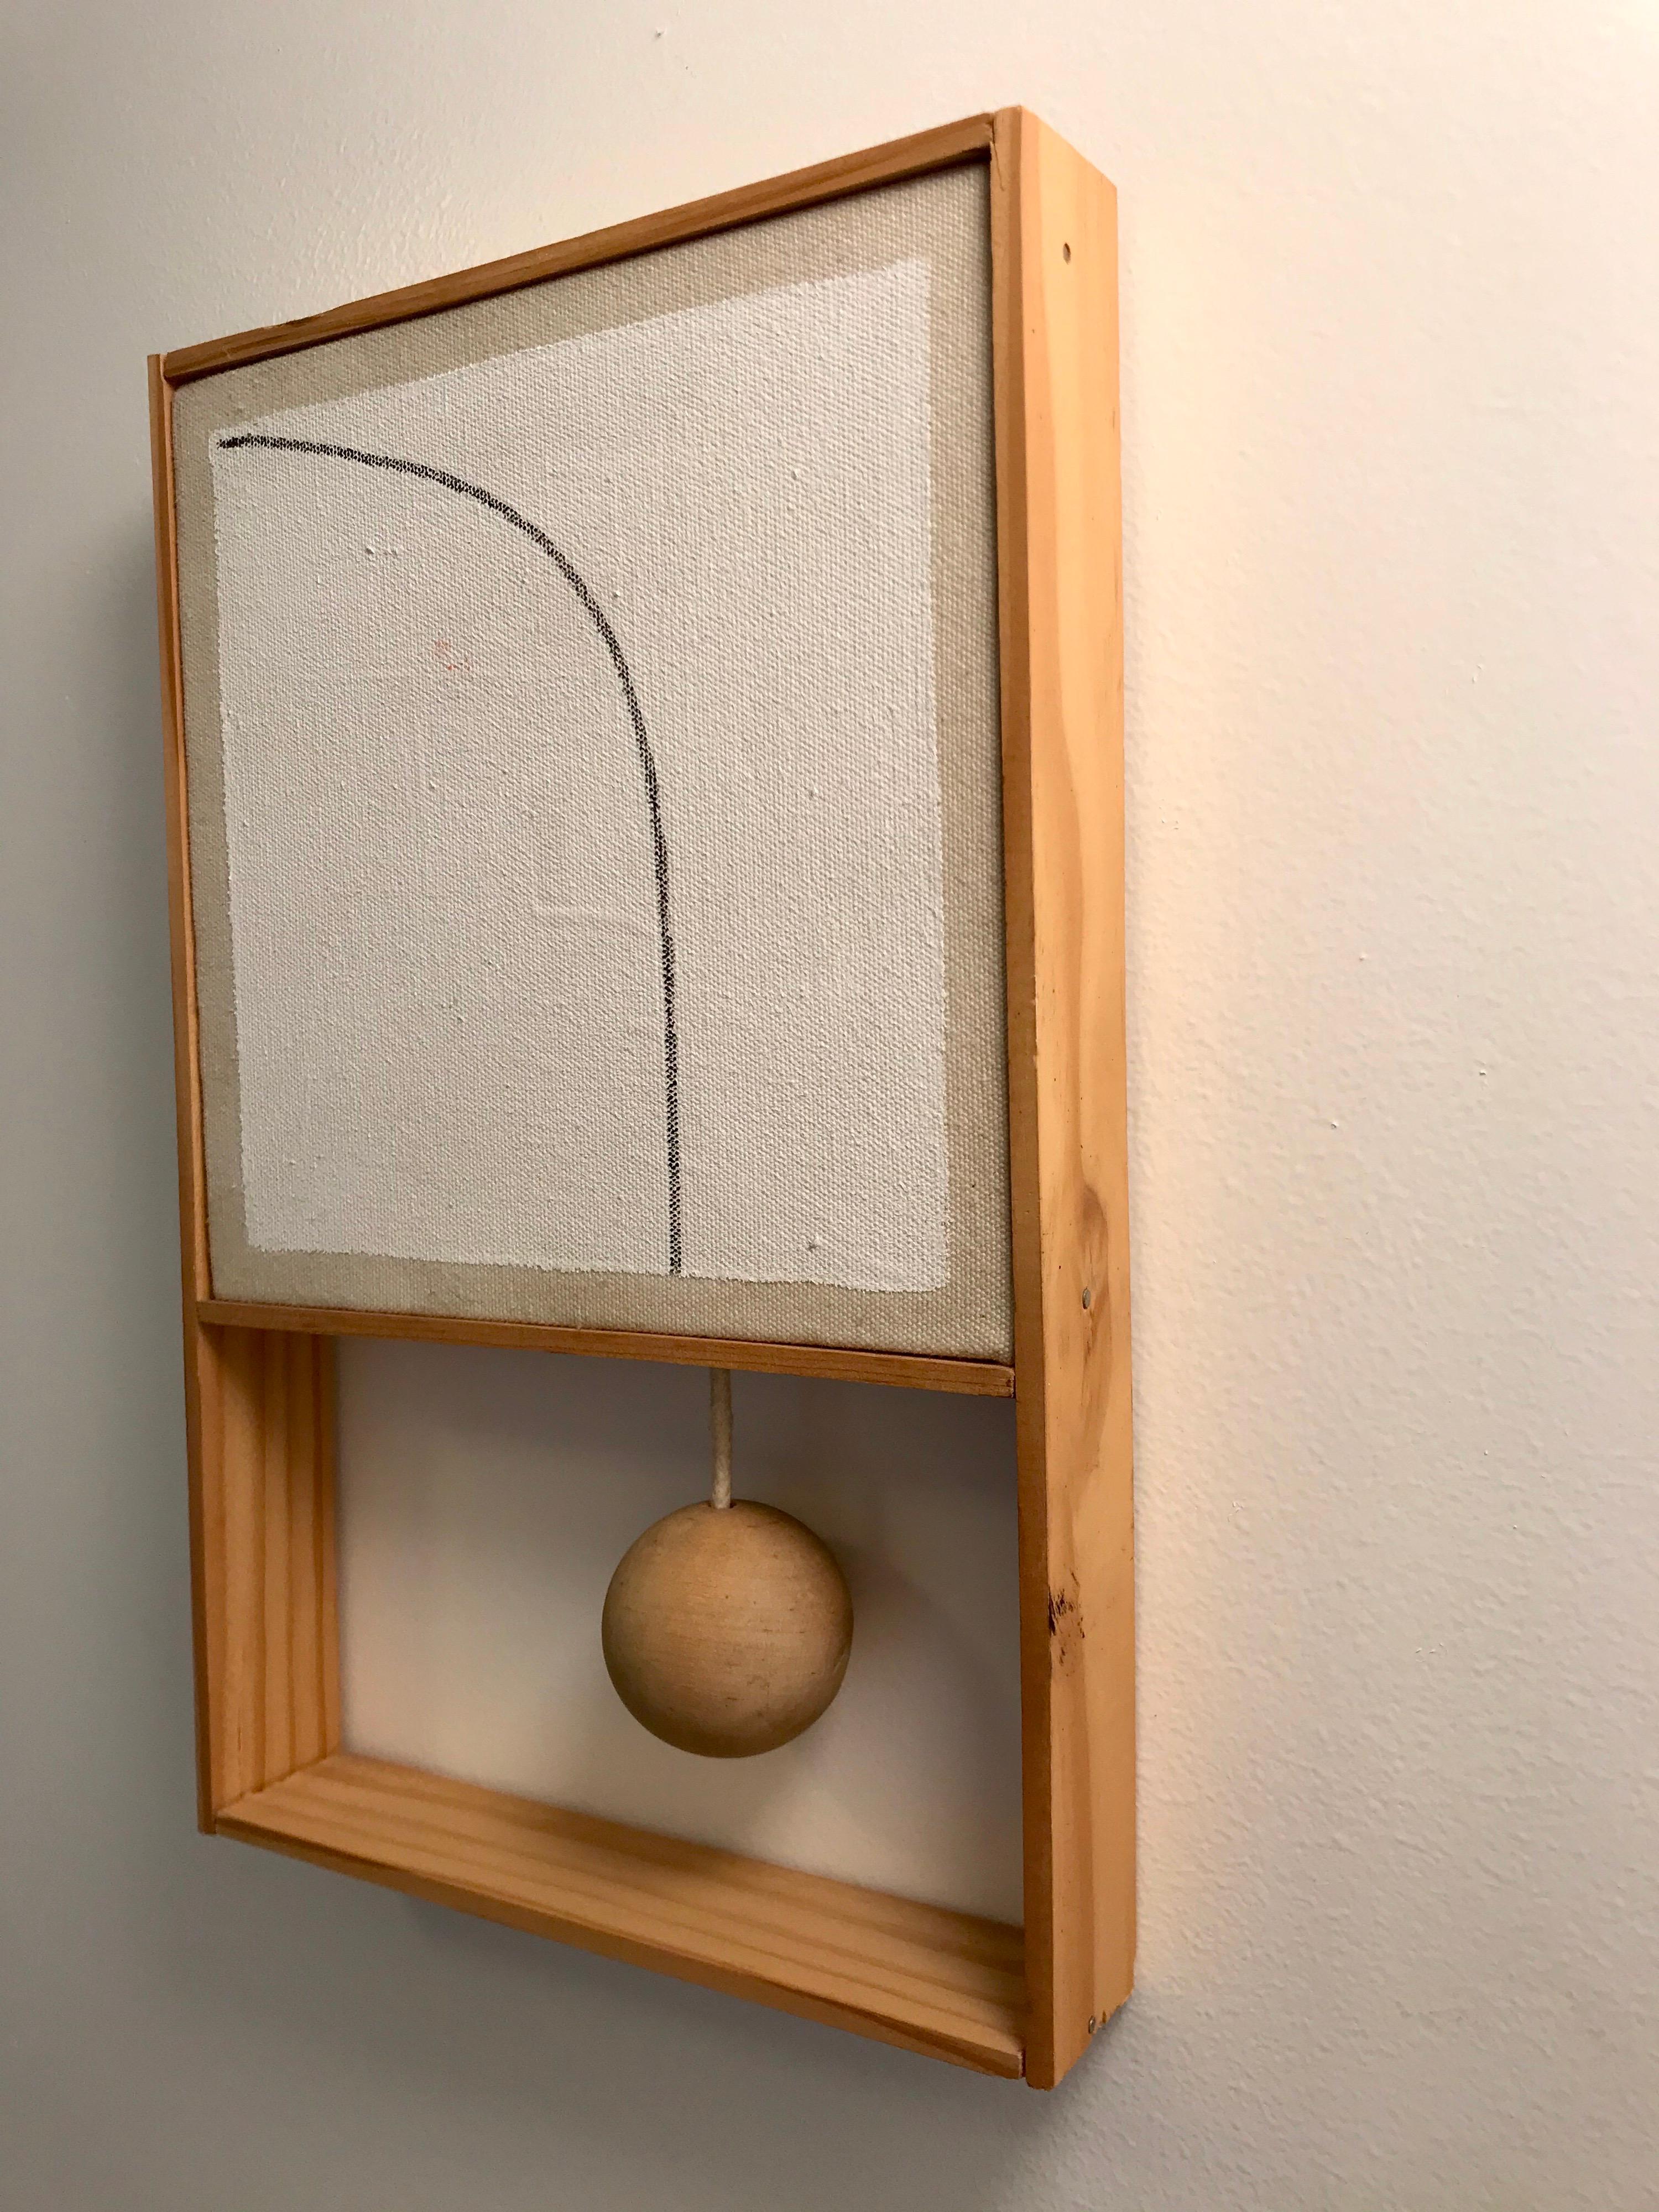 A nice piece of esoteric art
paint on canvas, graphite arc line, cord with natural wood sphere and thin wood frame.